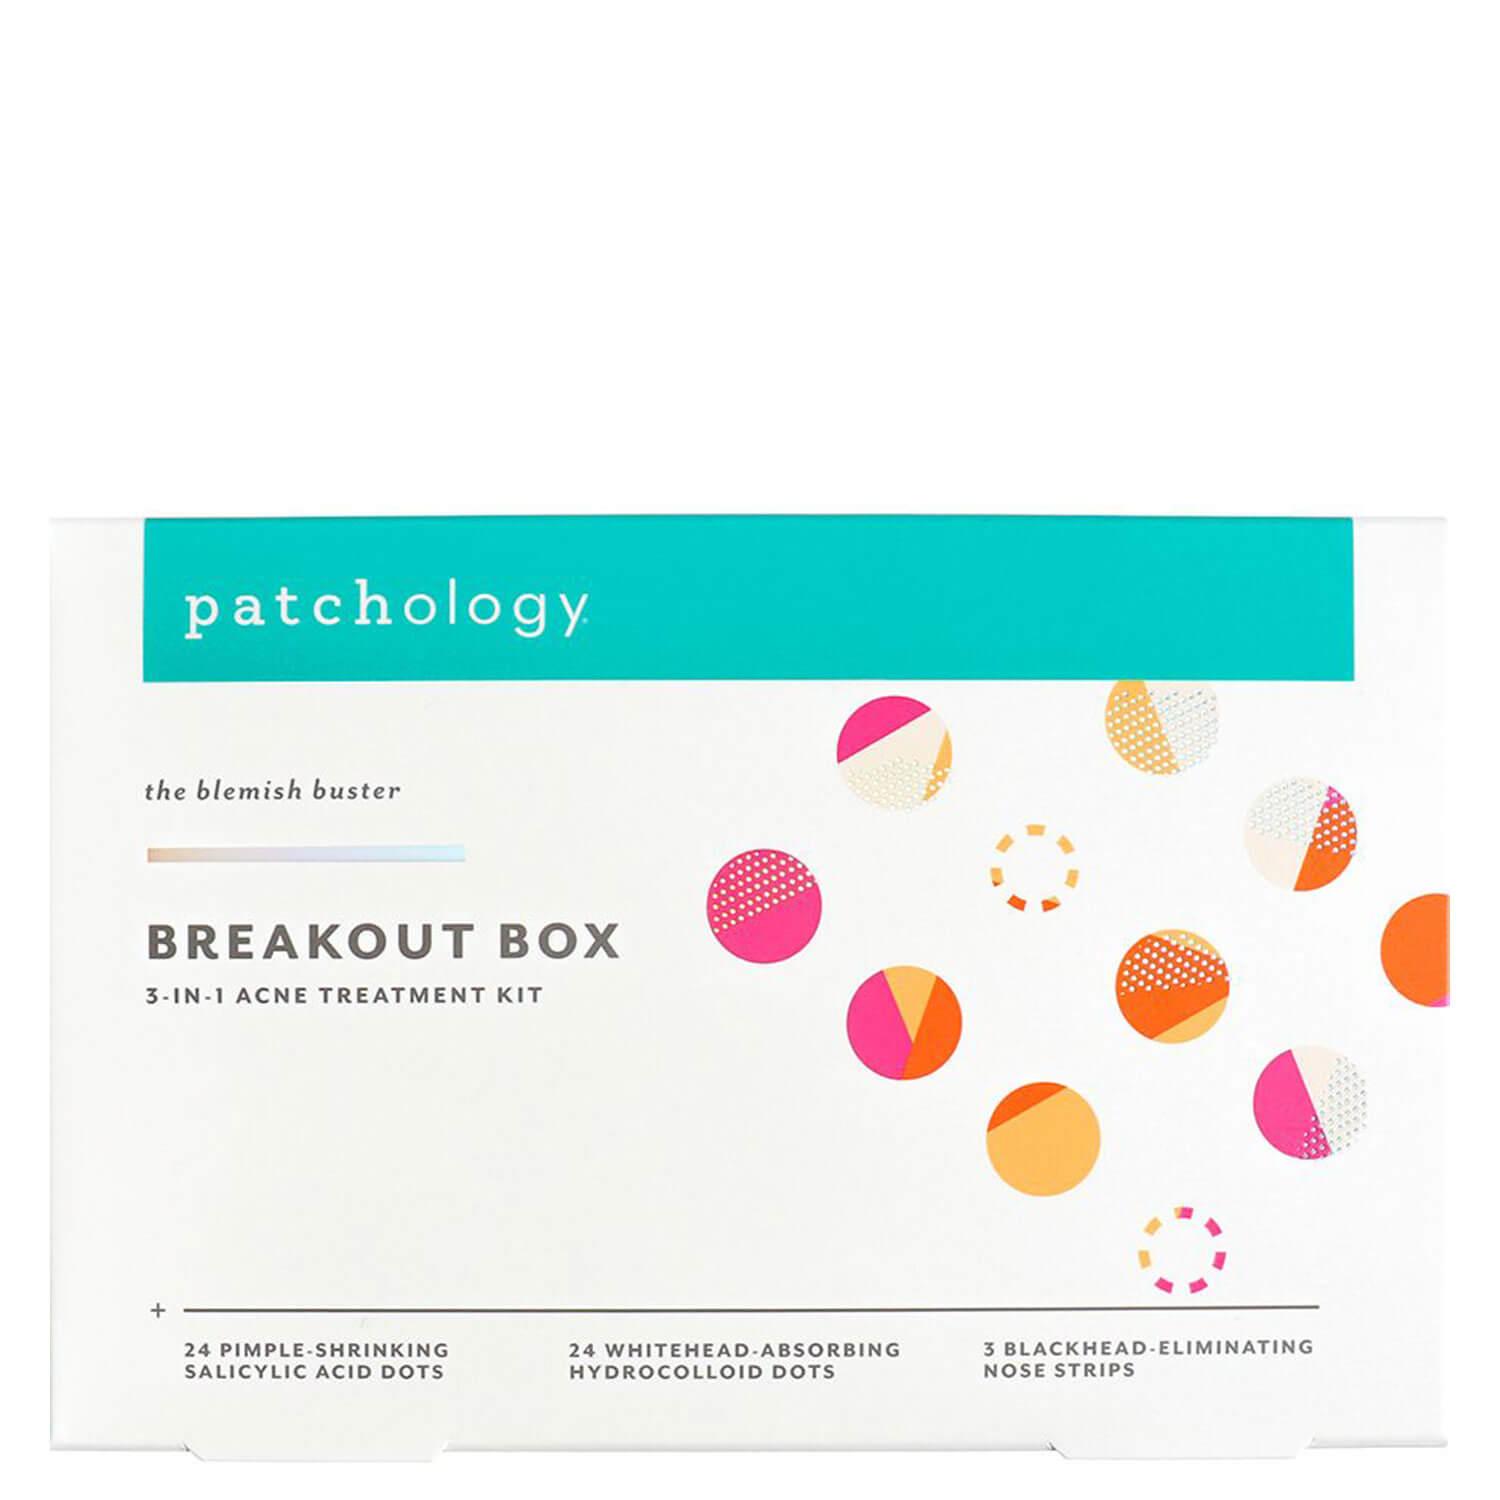 patchology Kits - Breakout Box 3-In-1 Acne Treatment Kit